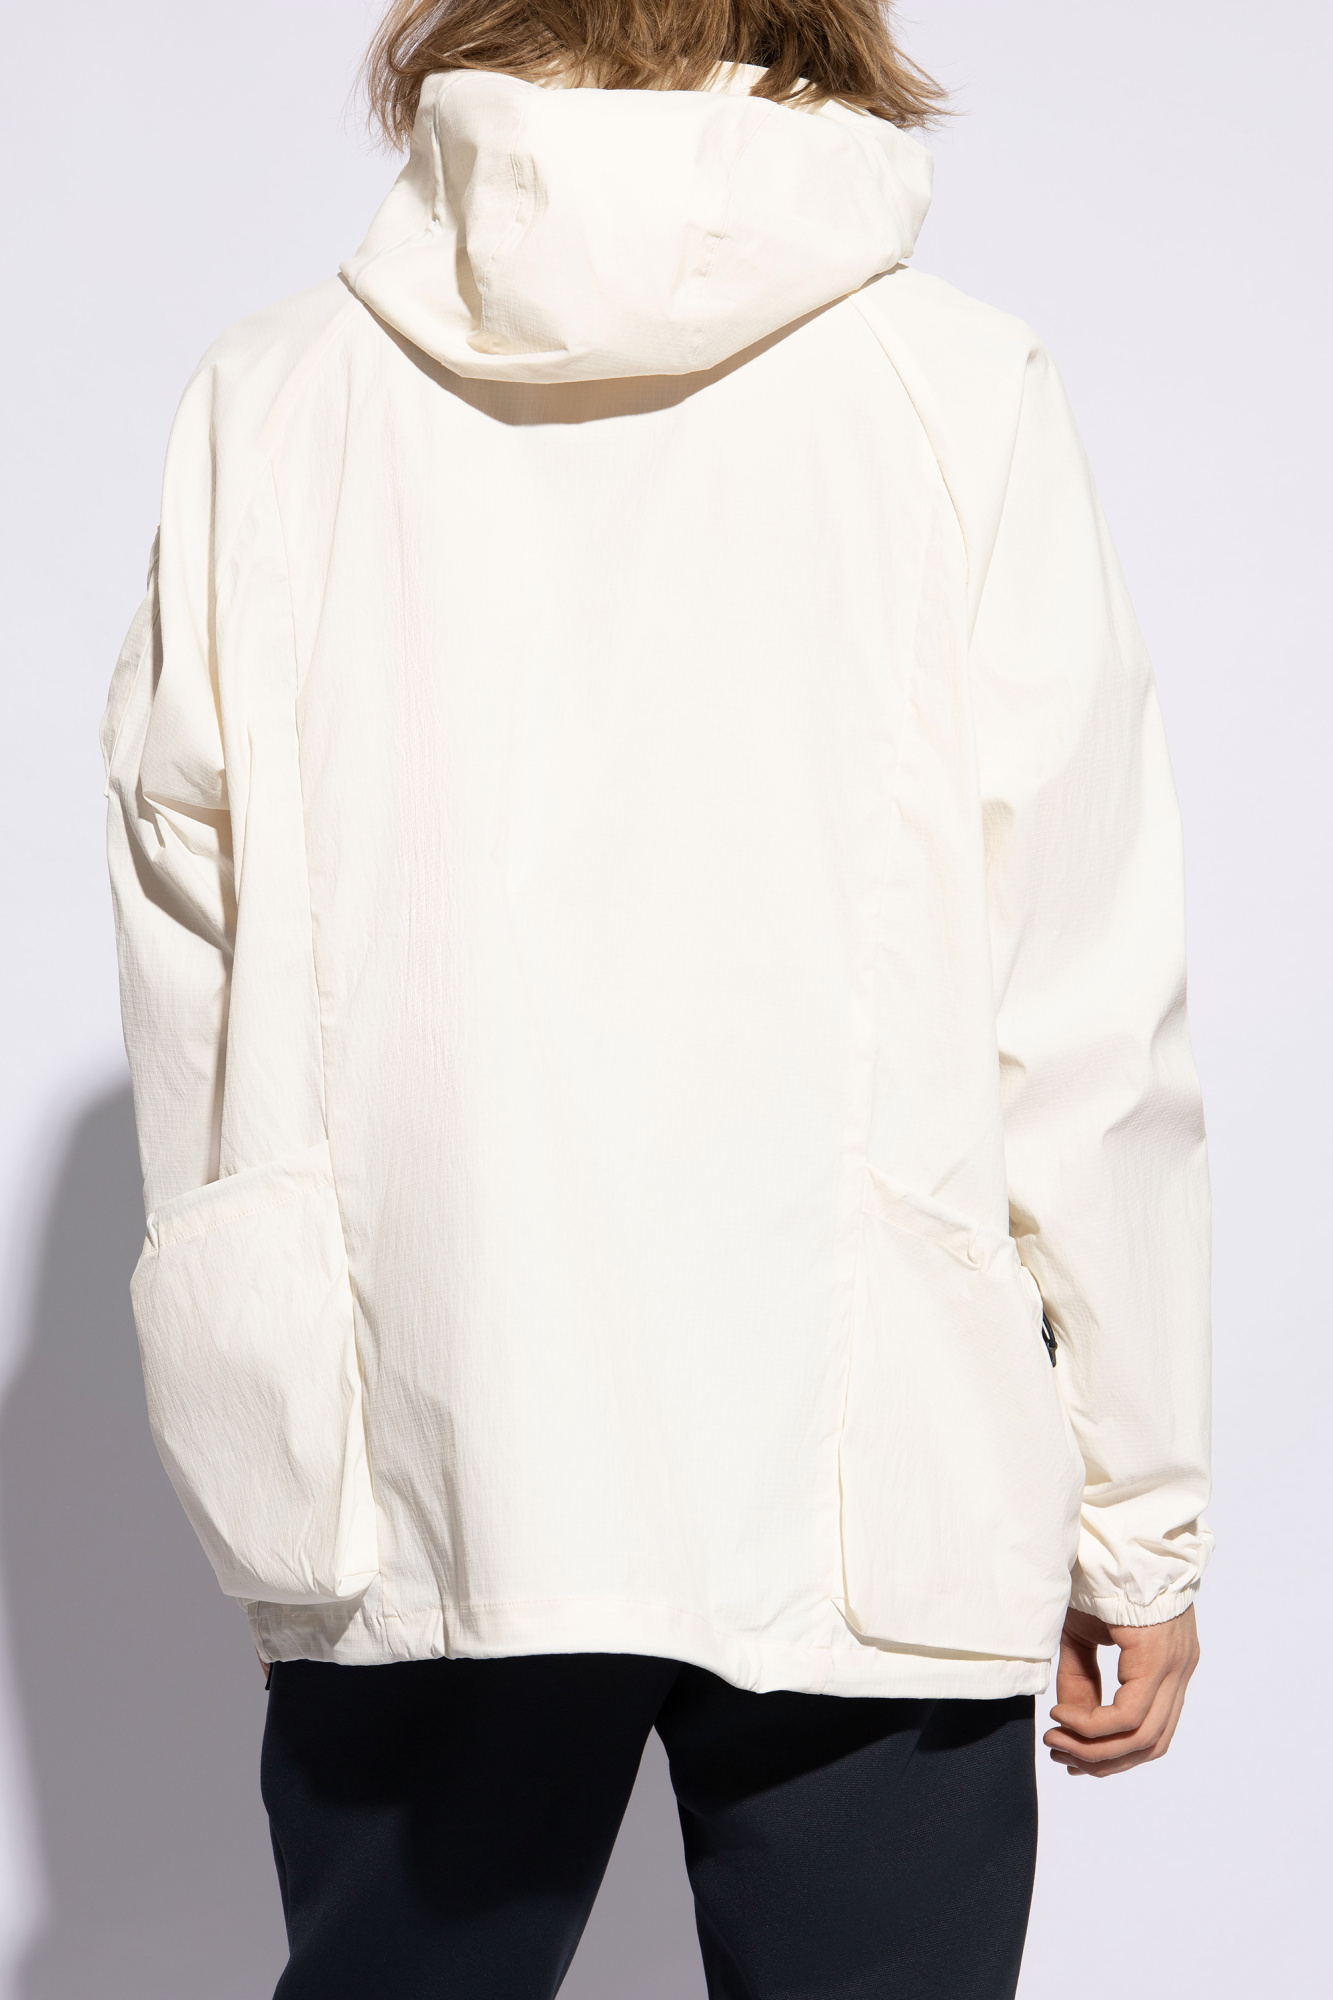 White Jacket from the 'Spezial' collection ADIDAS Originals 